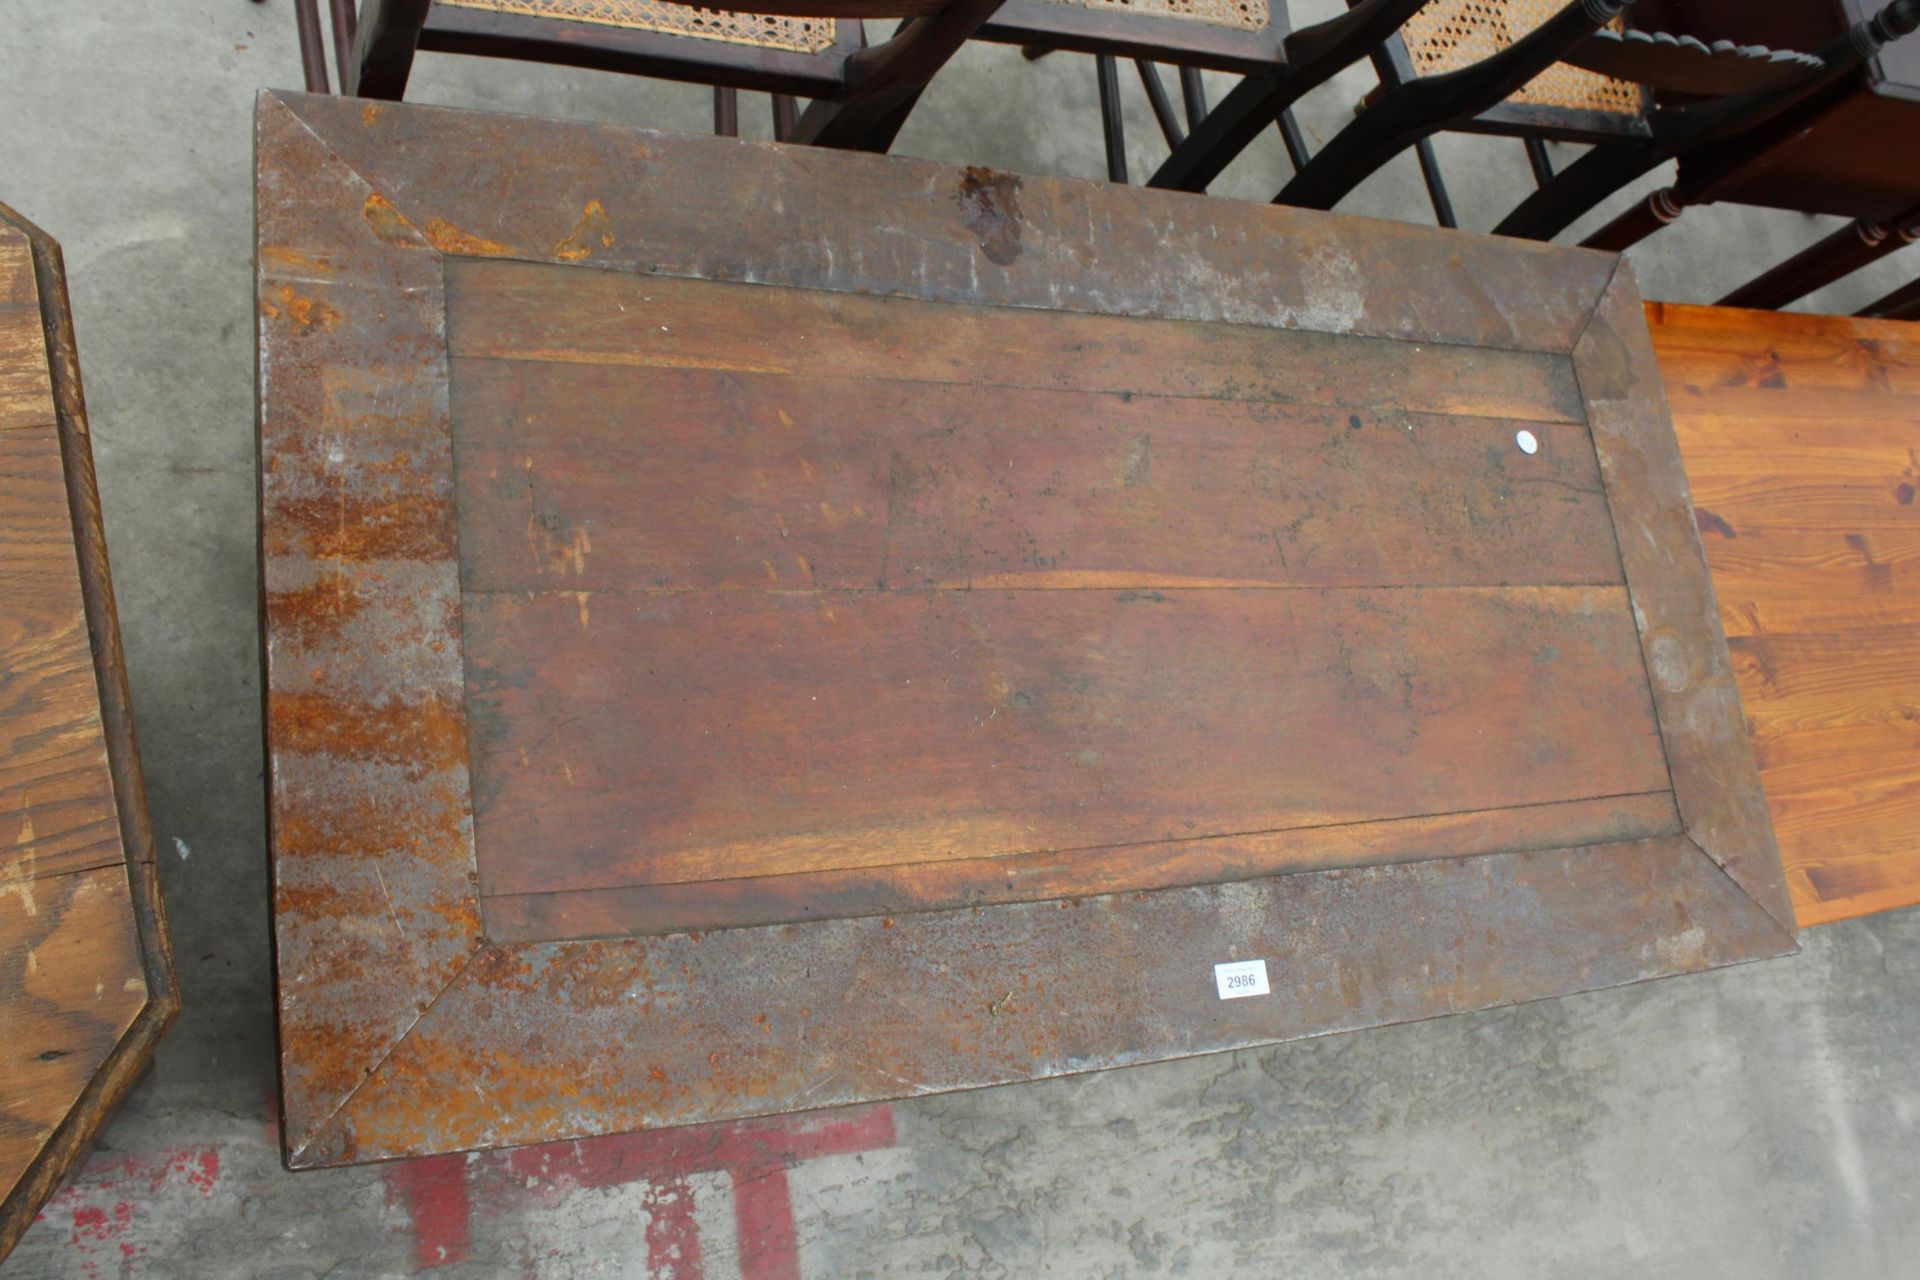 AN INDUSTRIAL STYLE COFFEE TABLE WITH METAL TRIM 43" X 24" AND AN OAK THREE TIER OCCASIONAL TABLE - Image 4 of 4